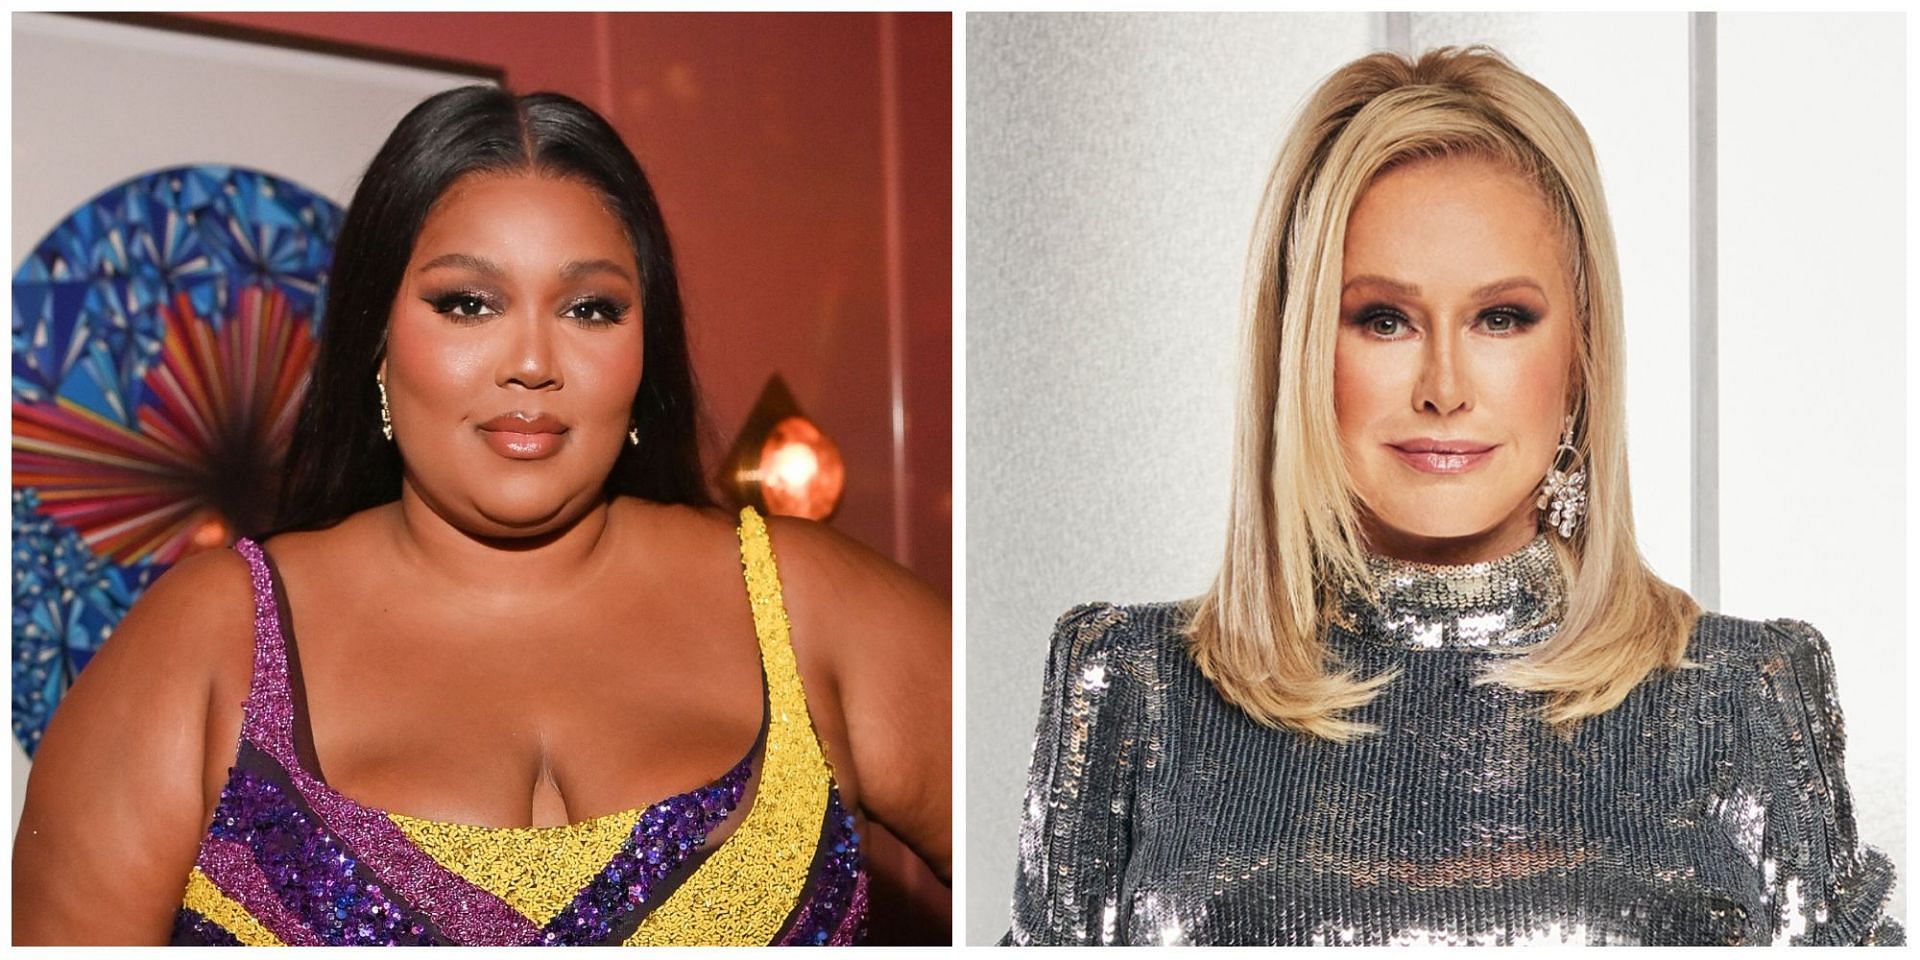 Kathy Hilton confused Lizzo for &quot;Precious.&quot; Gets slammed on social media. (Image via Twitter)